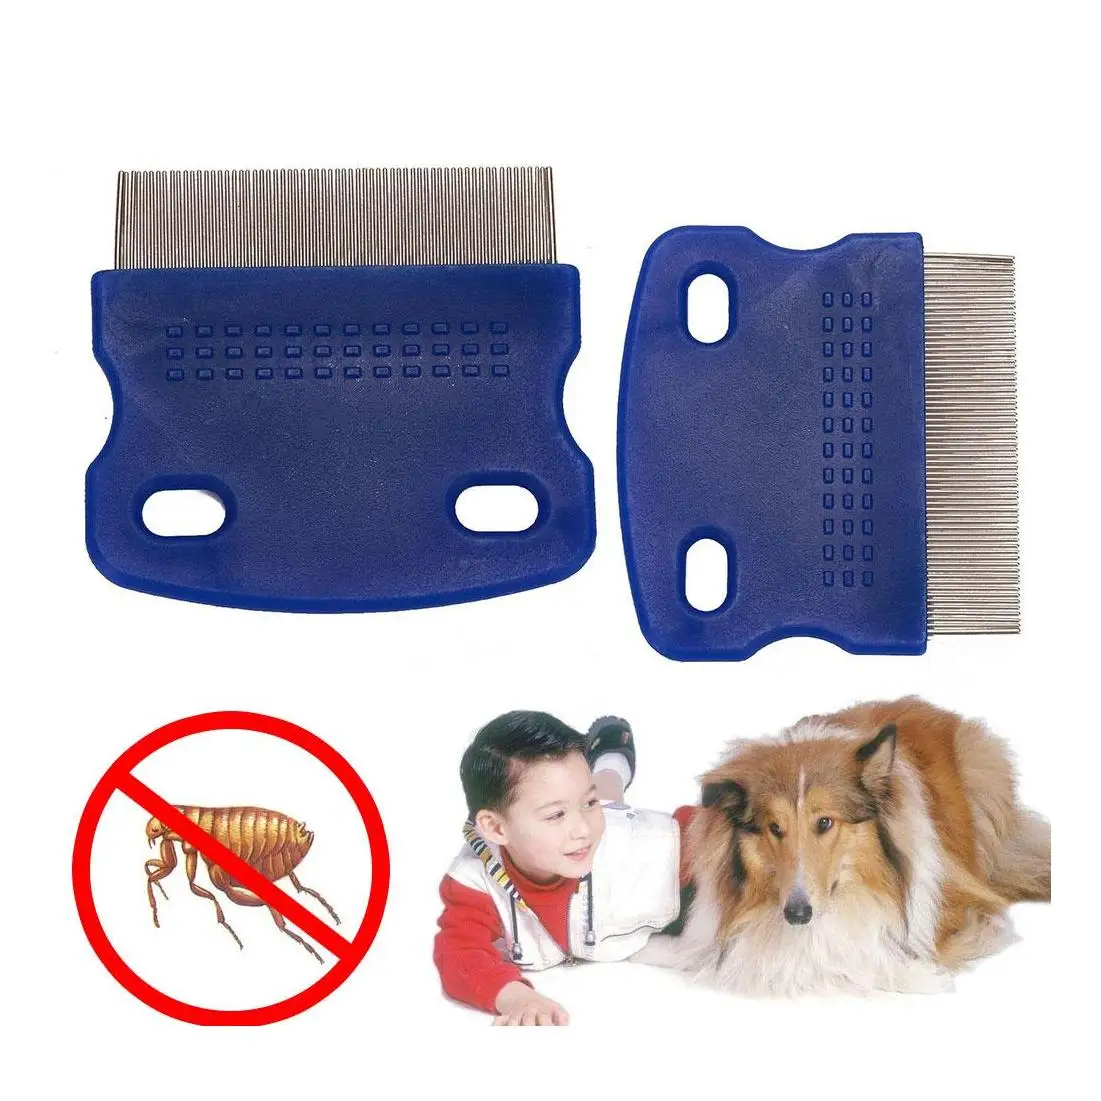 

Lice Comb Non Slip Handle Nit Pet Dog Cat Louse Flea Remove Brush Stainless Steel Grooming Tools Durable